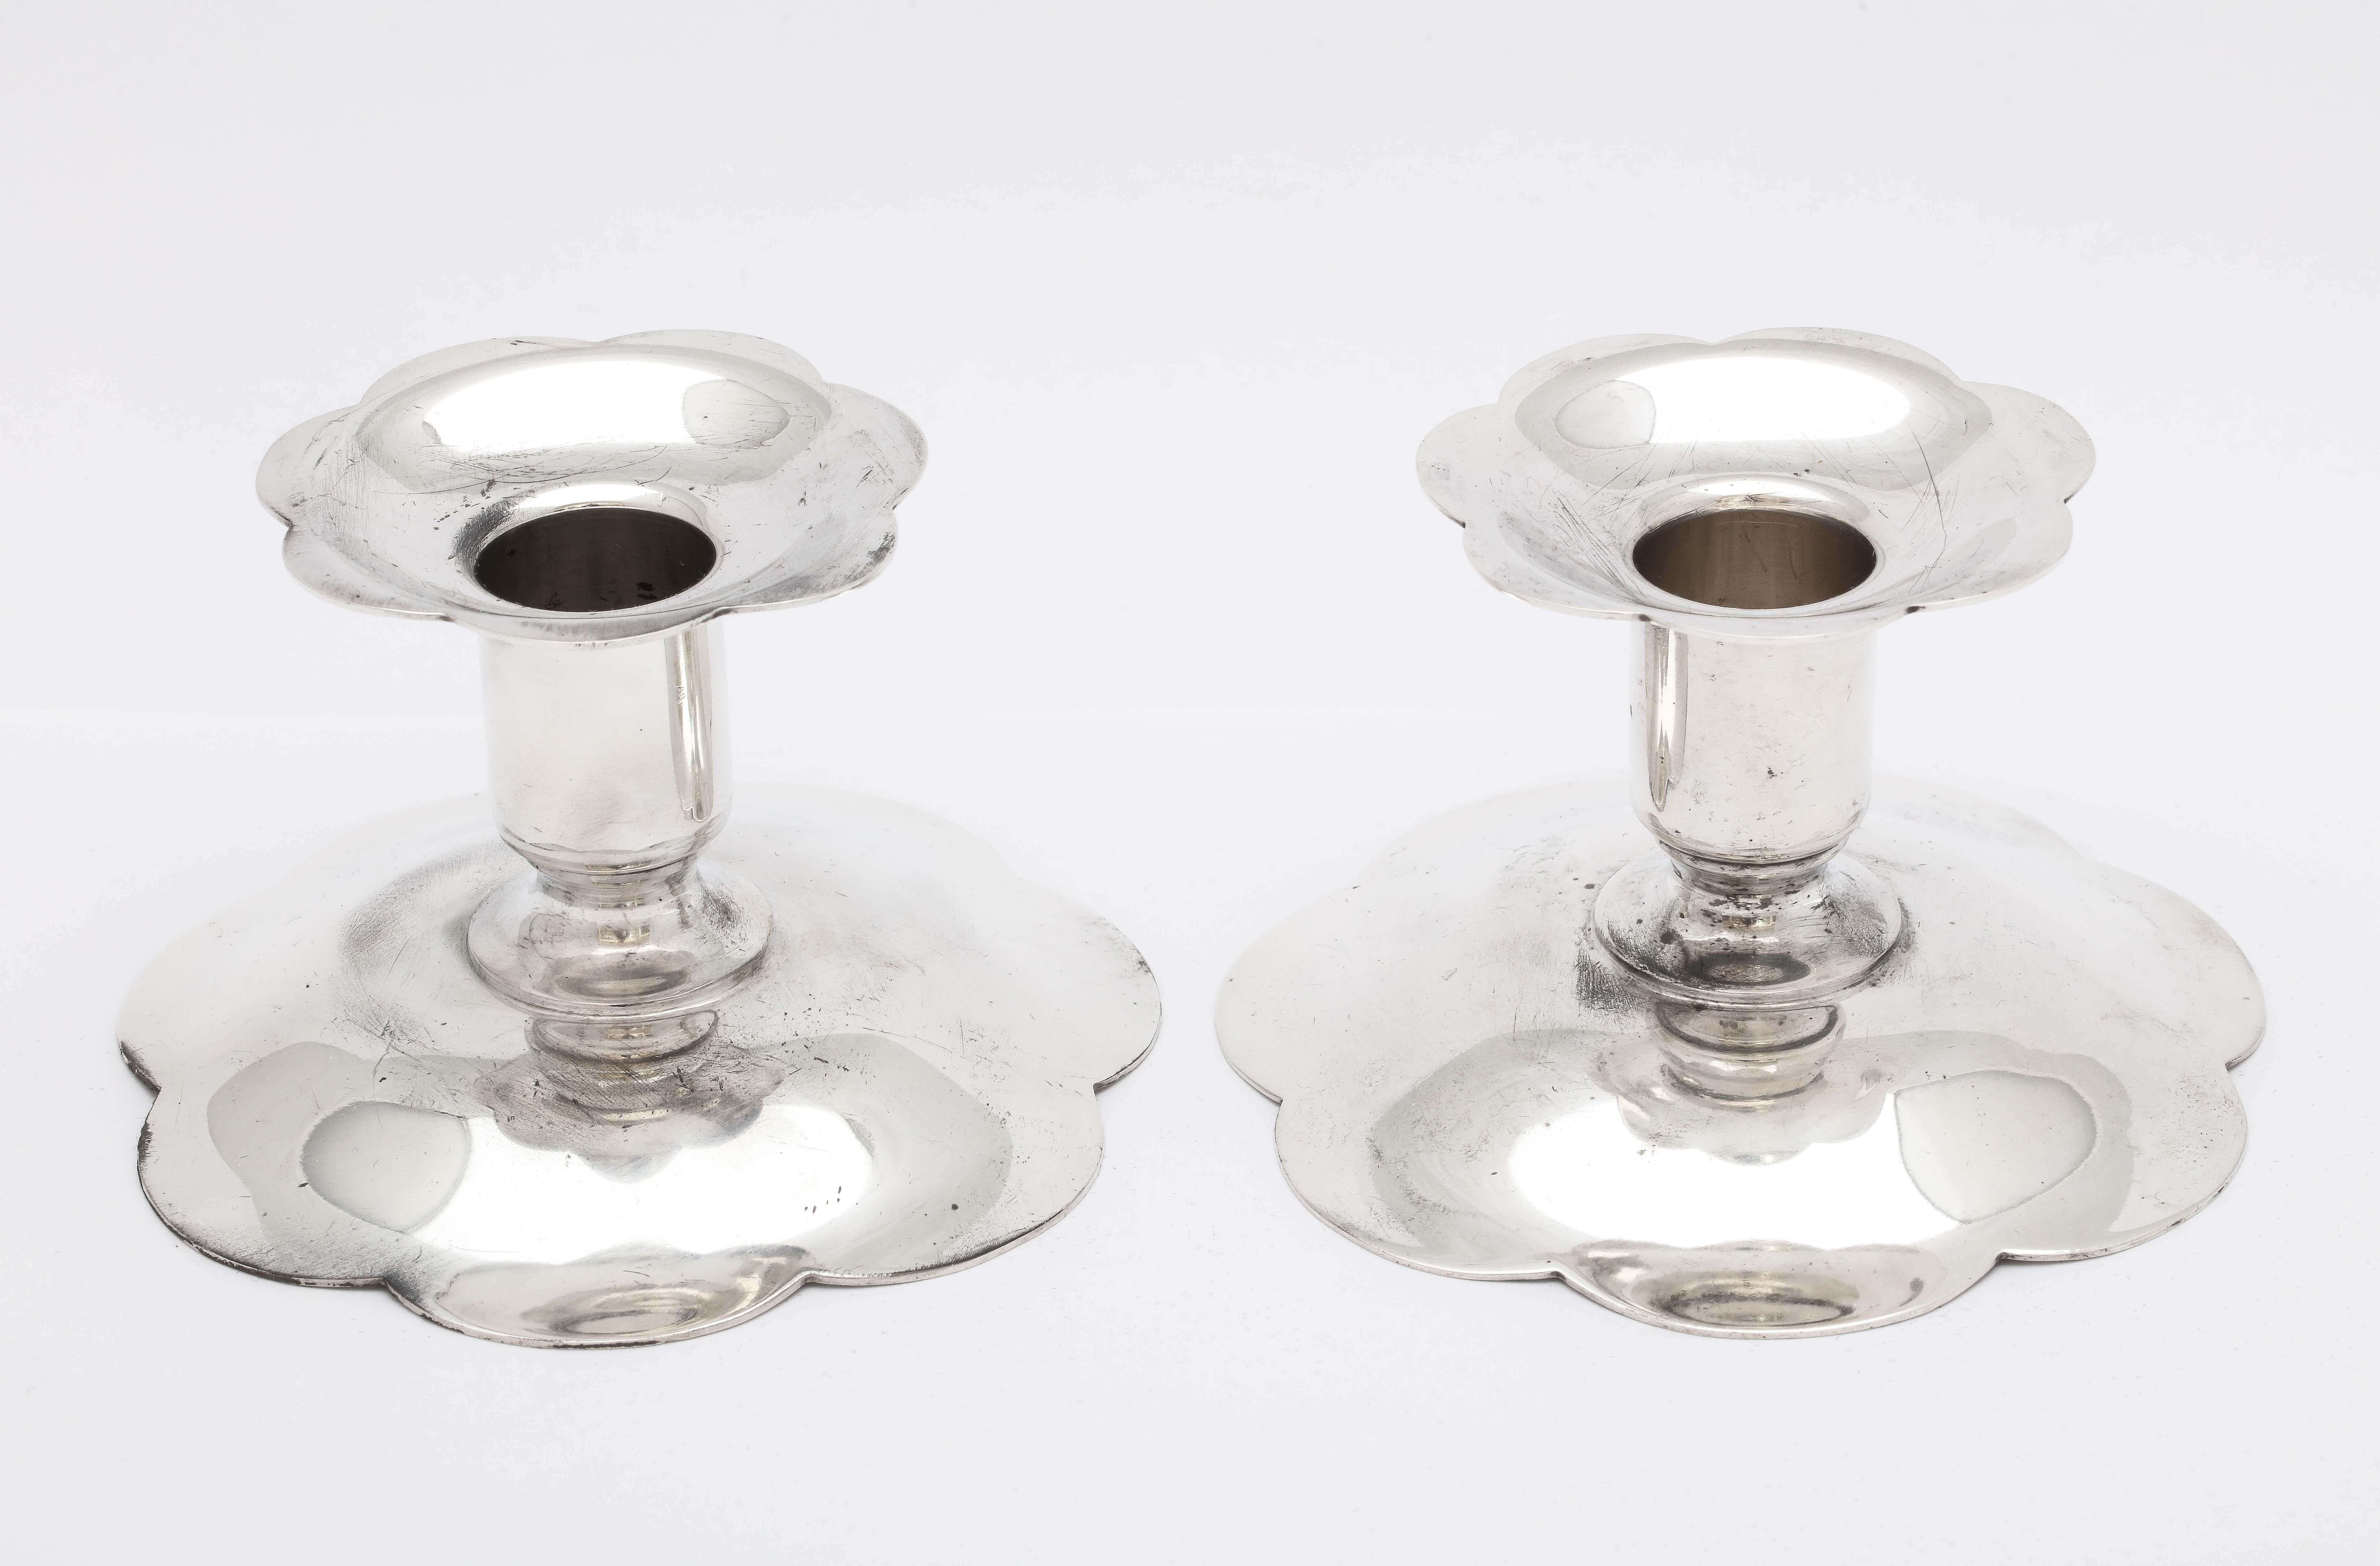 Mid-Century Modern pair of sterling silver candlesticks, Tiffany and Co., New York, circa 1960s. Bases are scalloped in design. Each of the pair measures 2 3/4 inches high x 3 3/4 inches diameter across base. Not weighted, the pair weighs 6.905 troy